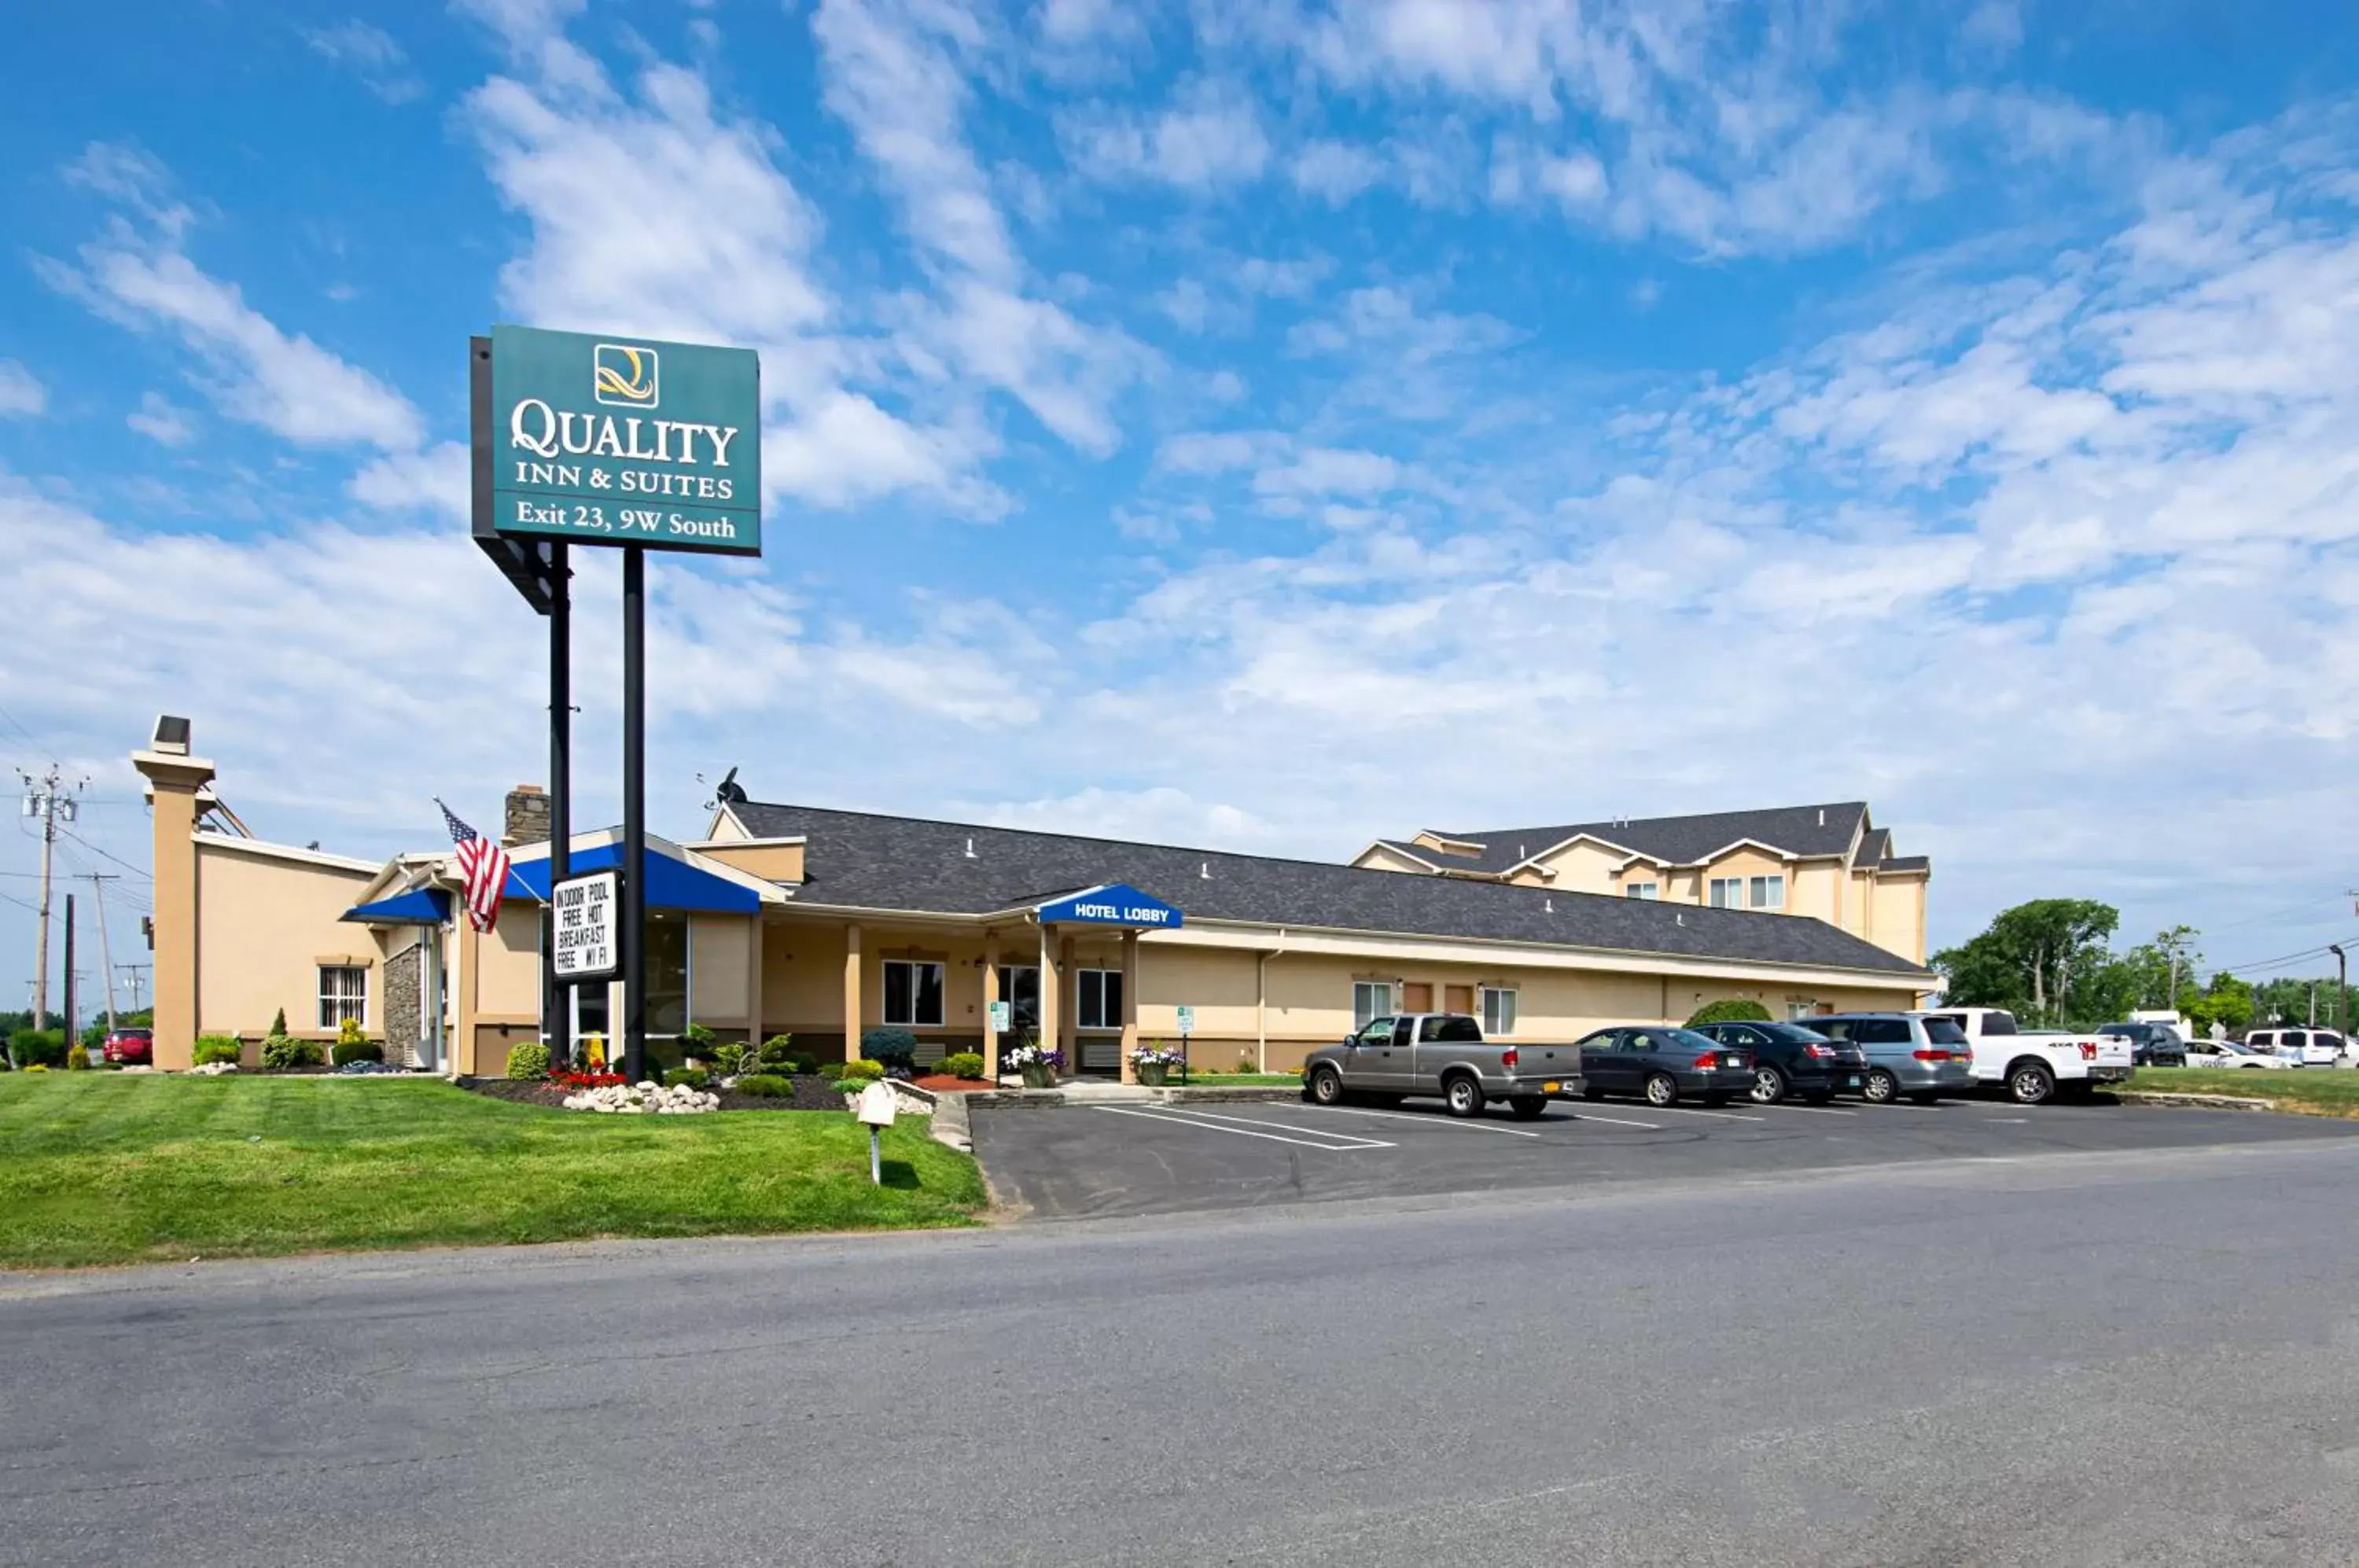 Property building in Quality Inn & Suites Glenmont - Albany South